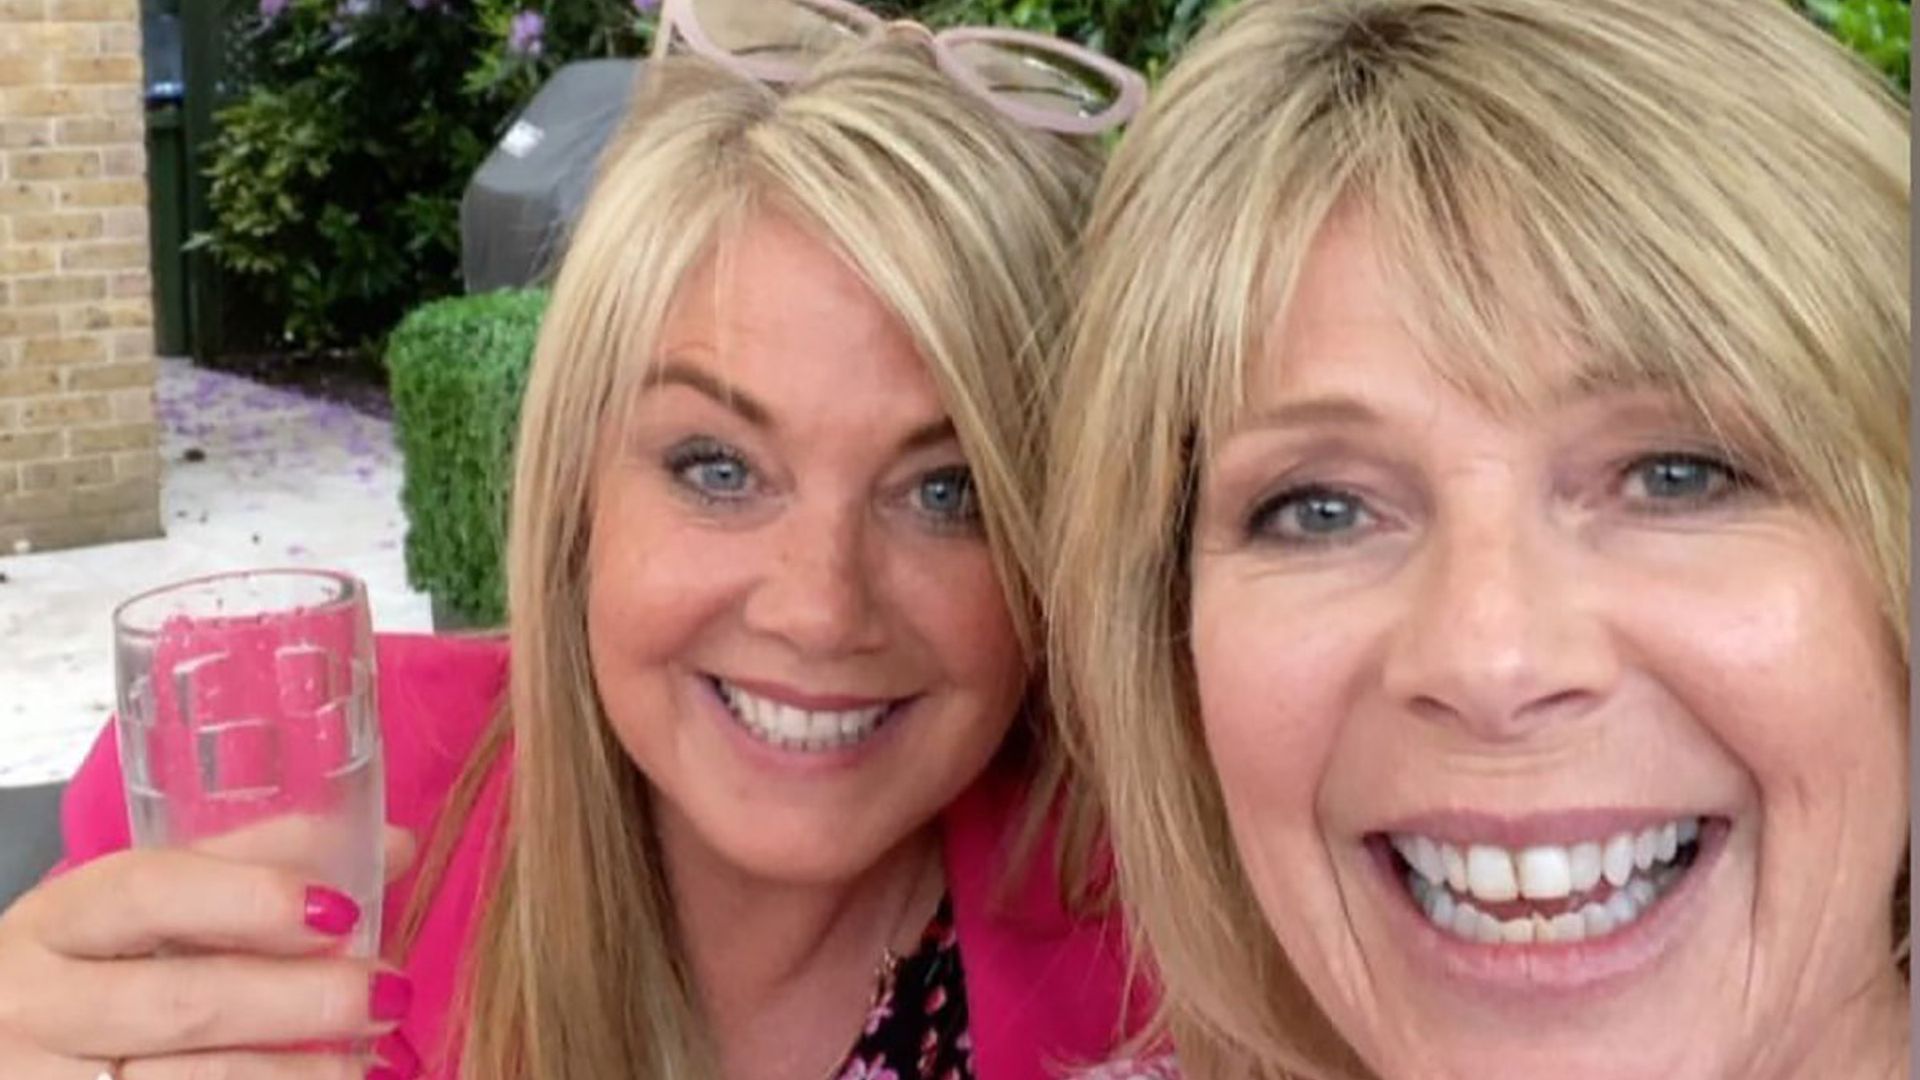 Ruth Langsford and Lucy Alexander twin in pink as they enjoy champagne date in gorgeous garden